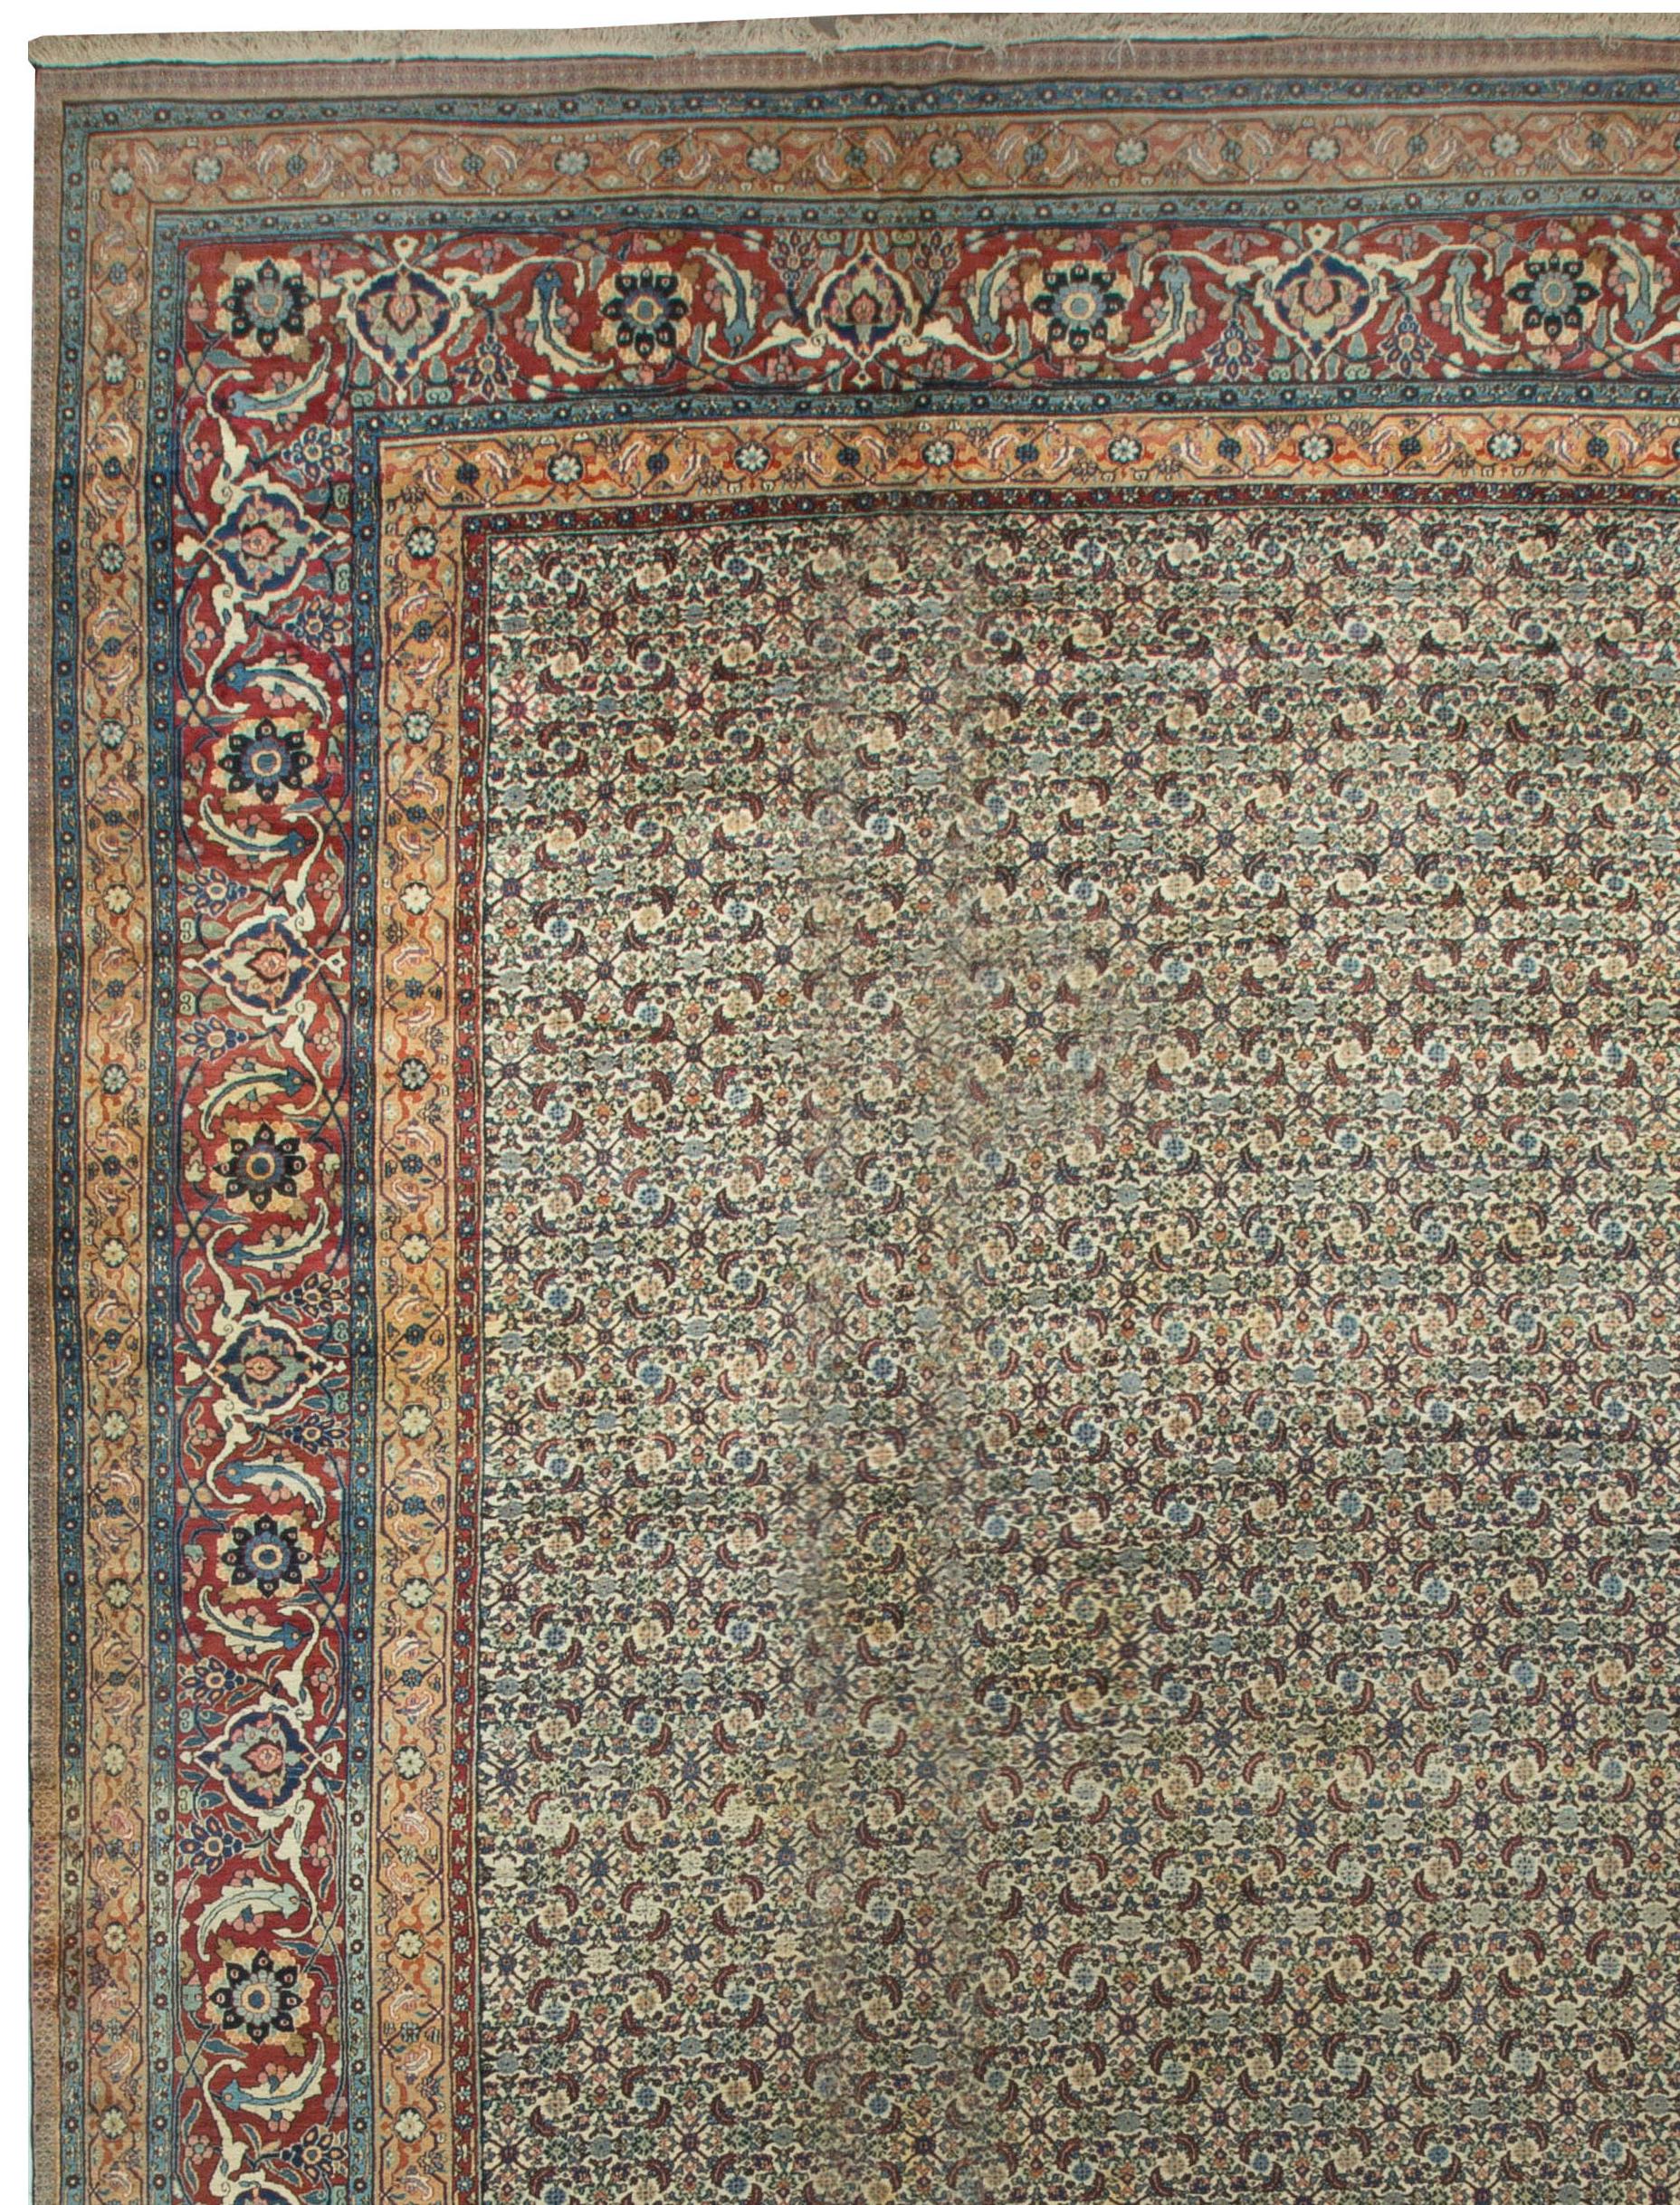 This Fine rug with its multicolored ground, surrounded by a main border and two minor borders creates a light and generous feel that will suit both a contemporary and traditional room setting. Khorassan is in northeastern Iran and is well know for